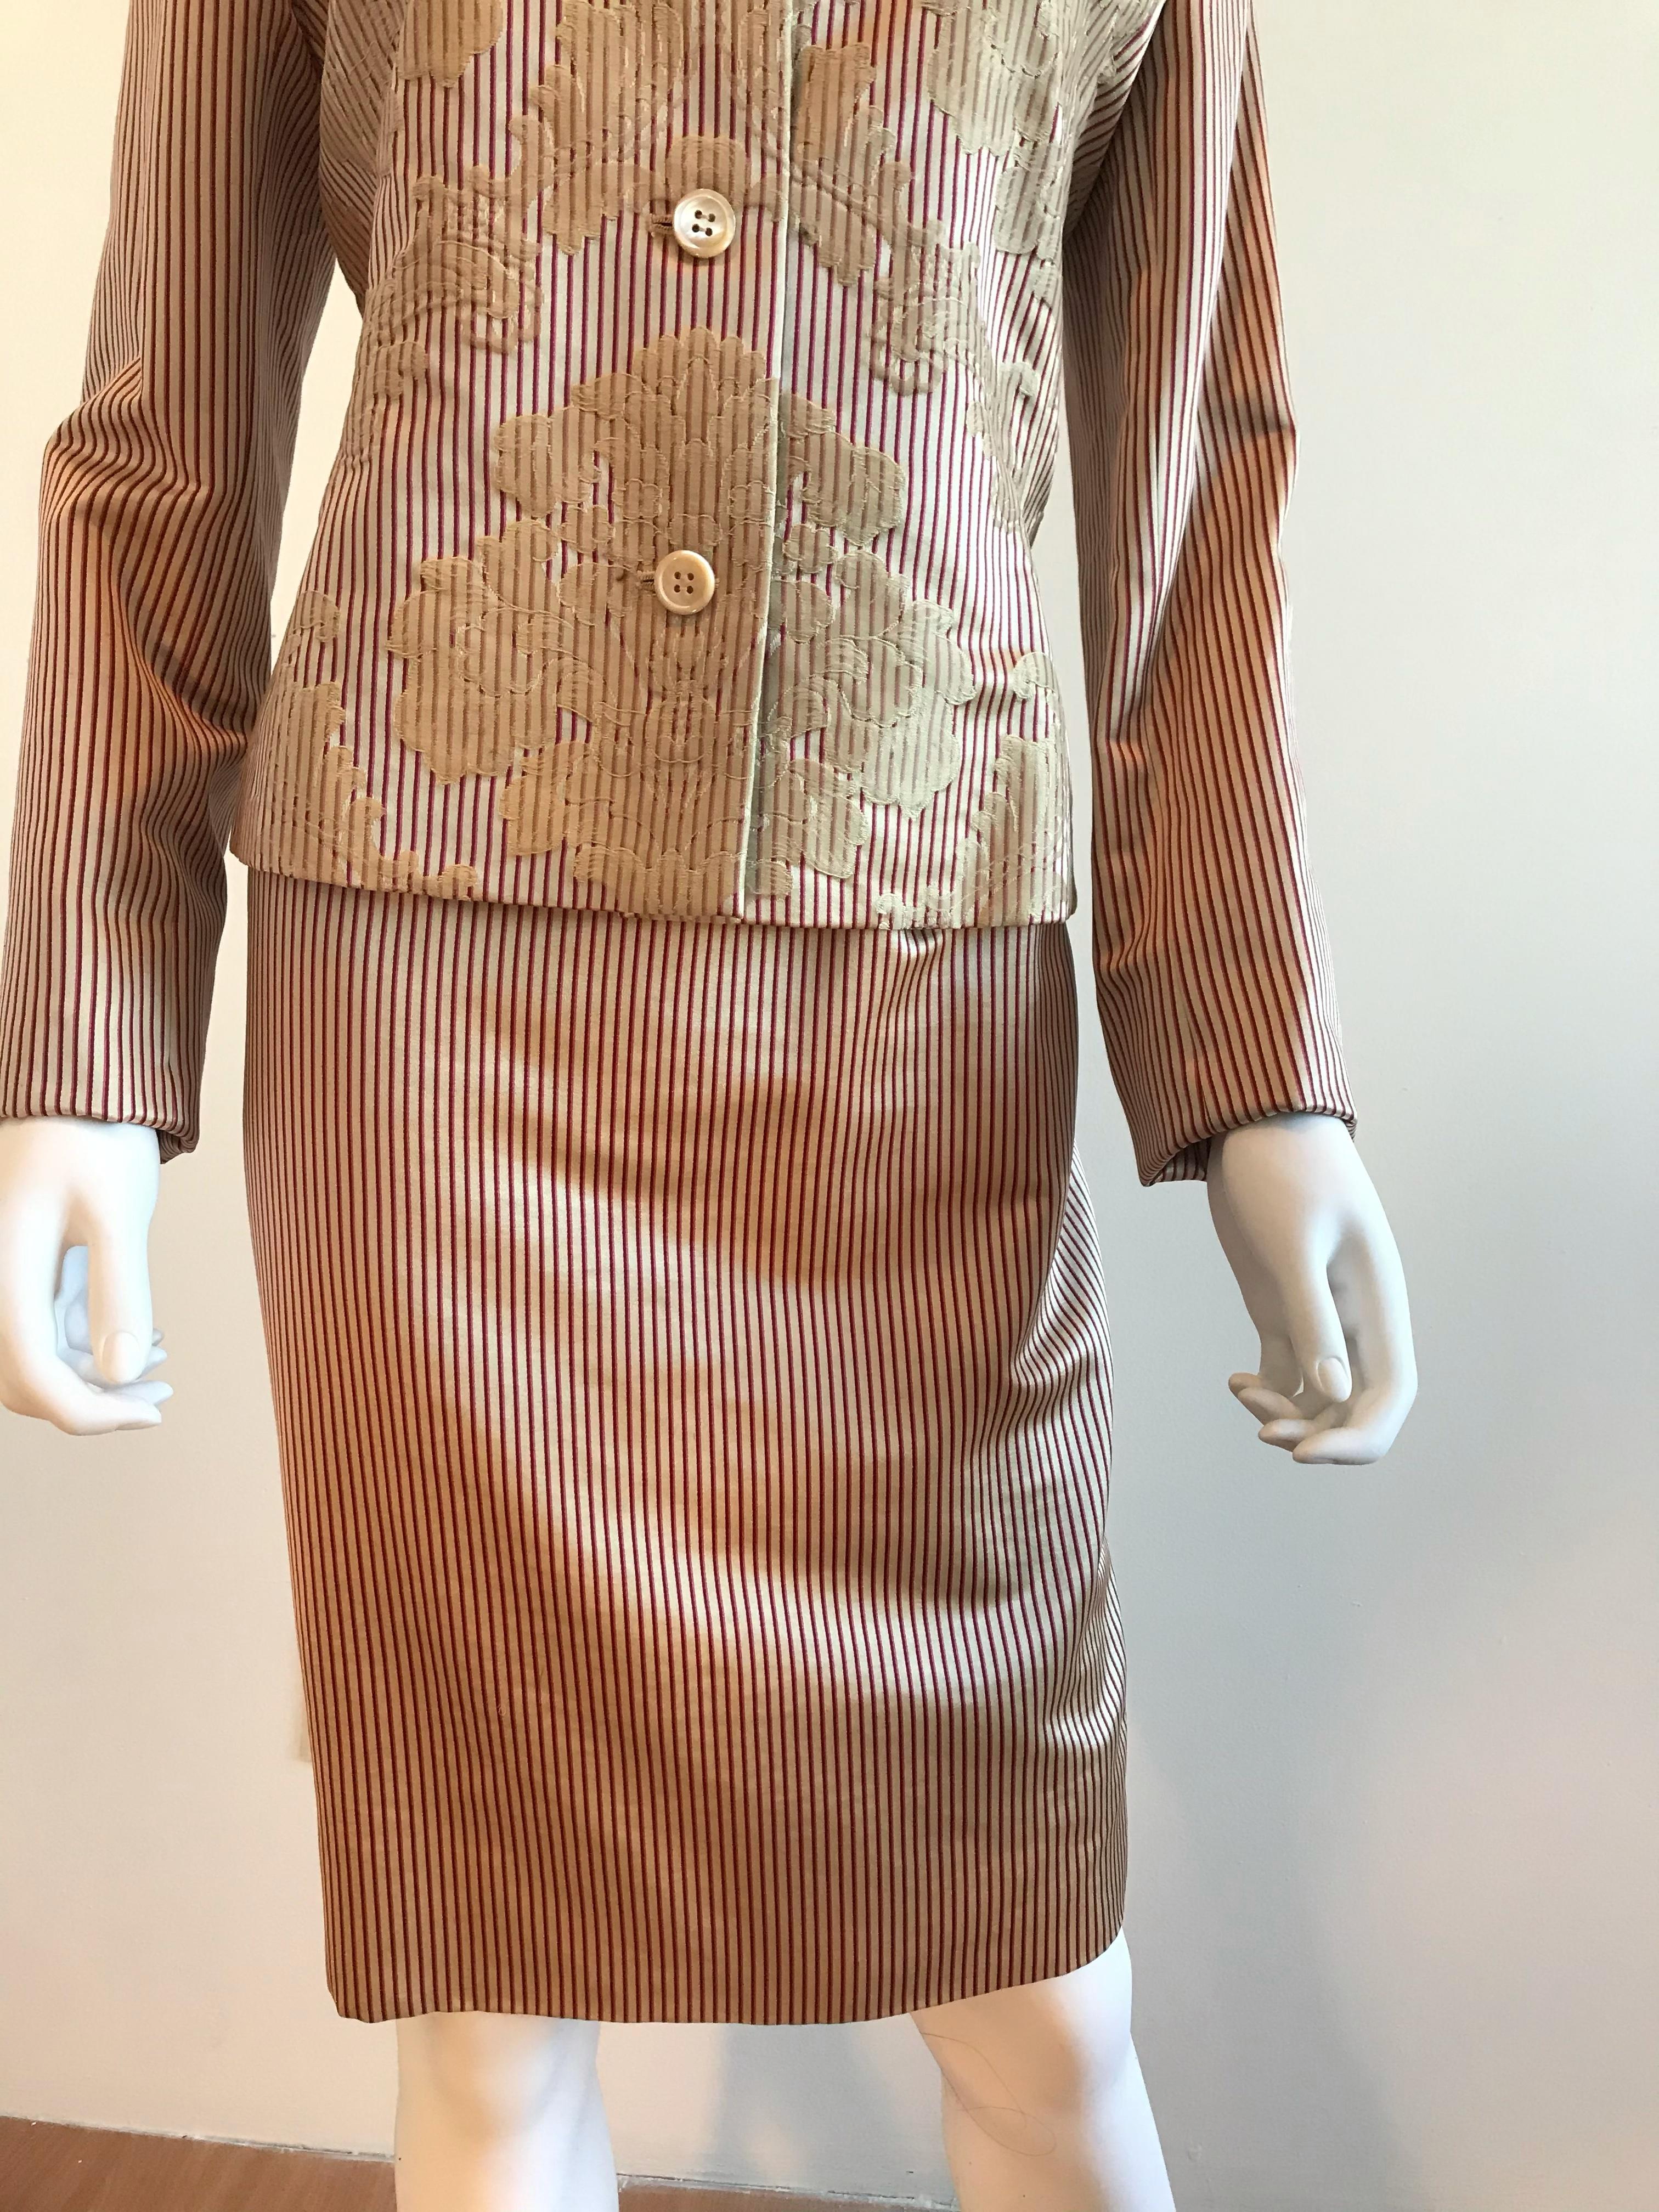 Bill Blass Silk Stripe Brocade Jacket and Skirt Set
Size US 10
Made in USA of imported fabrics
Please ask questions!
Purchasing this item continues its narrative and reduces the environmental impact of using new resources. You can be confident that